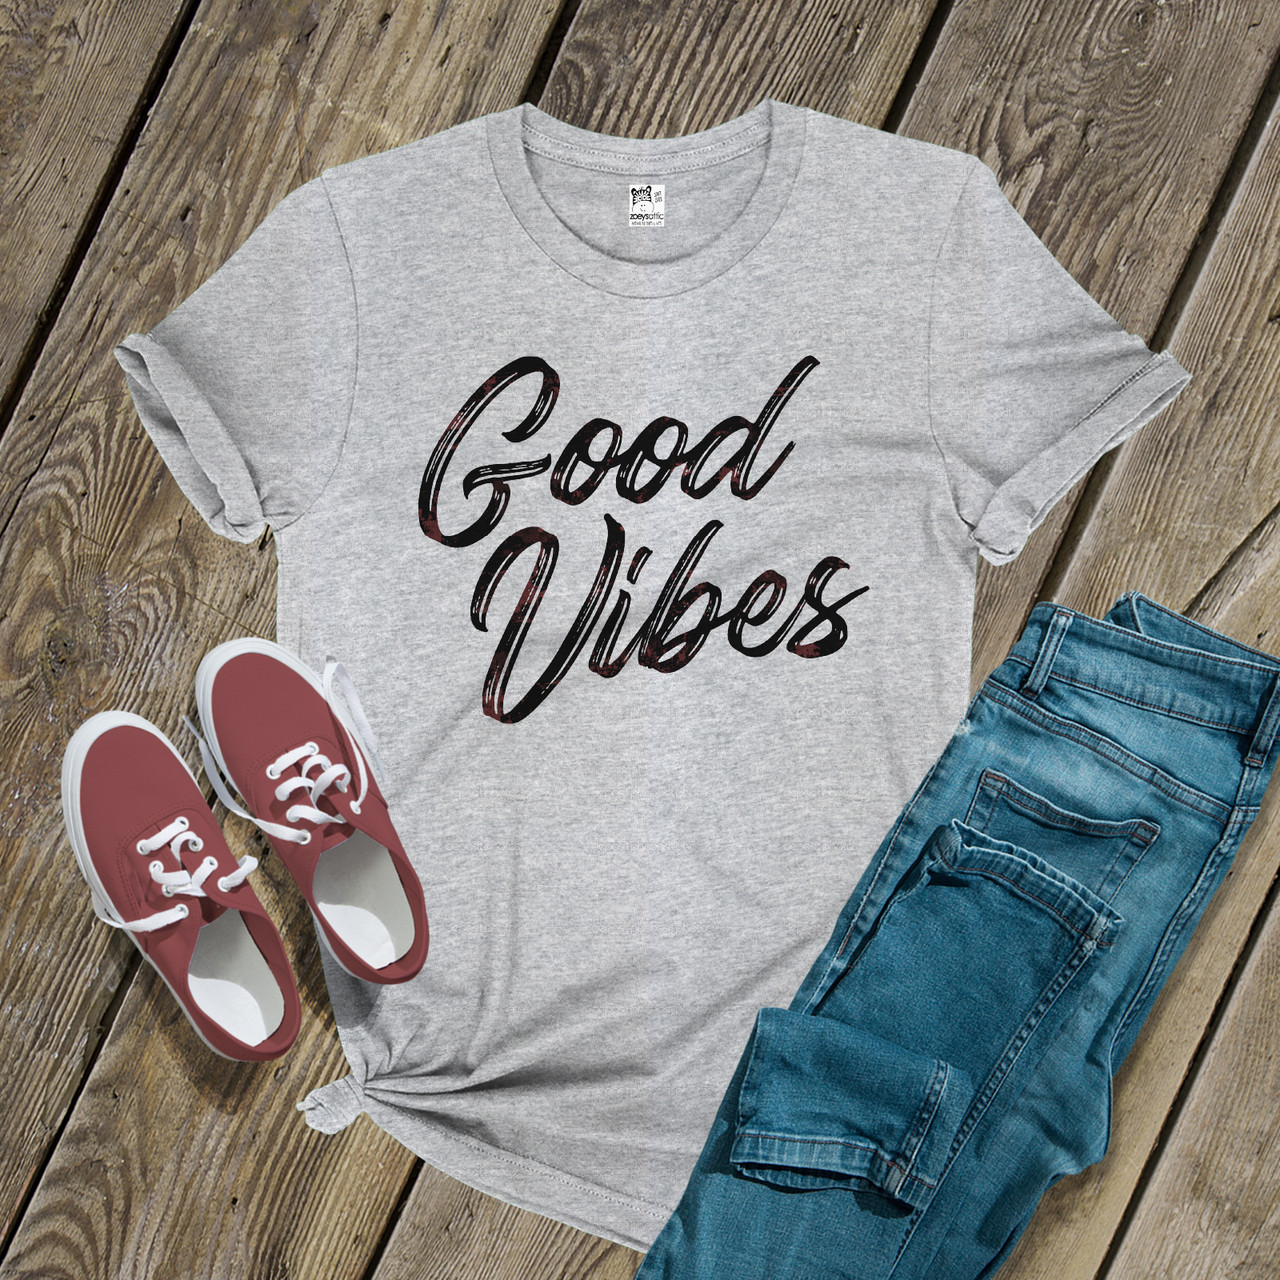 It's A Good Day To Have T-Shirt, Positivity Shirts, Vibes Only